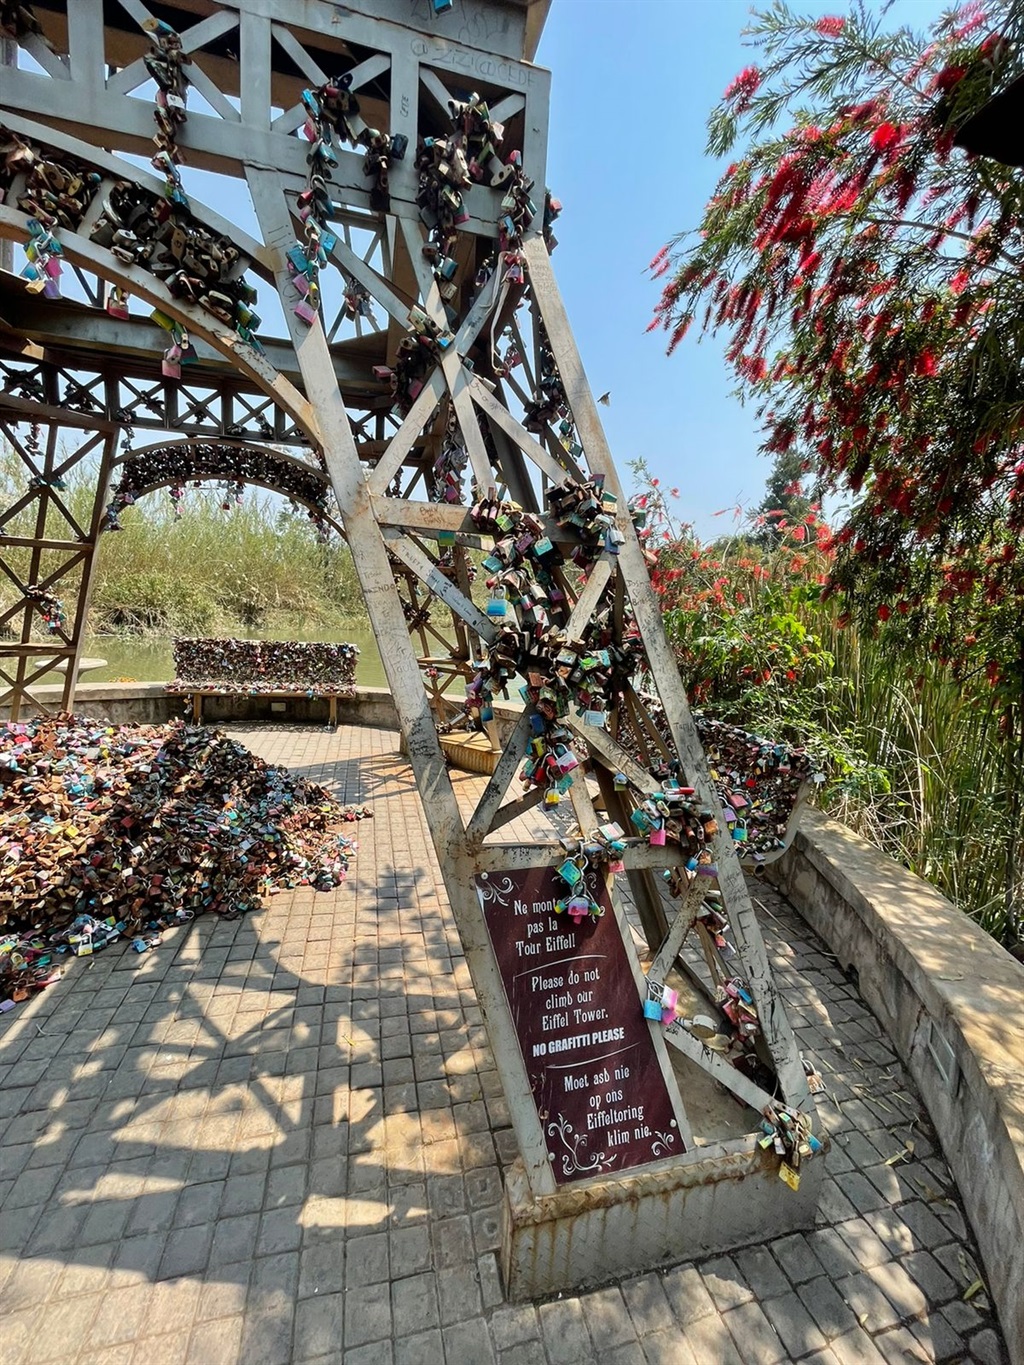 The thousands of 'lover's locks' left in Little Pa